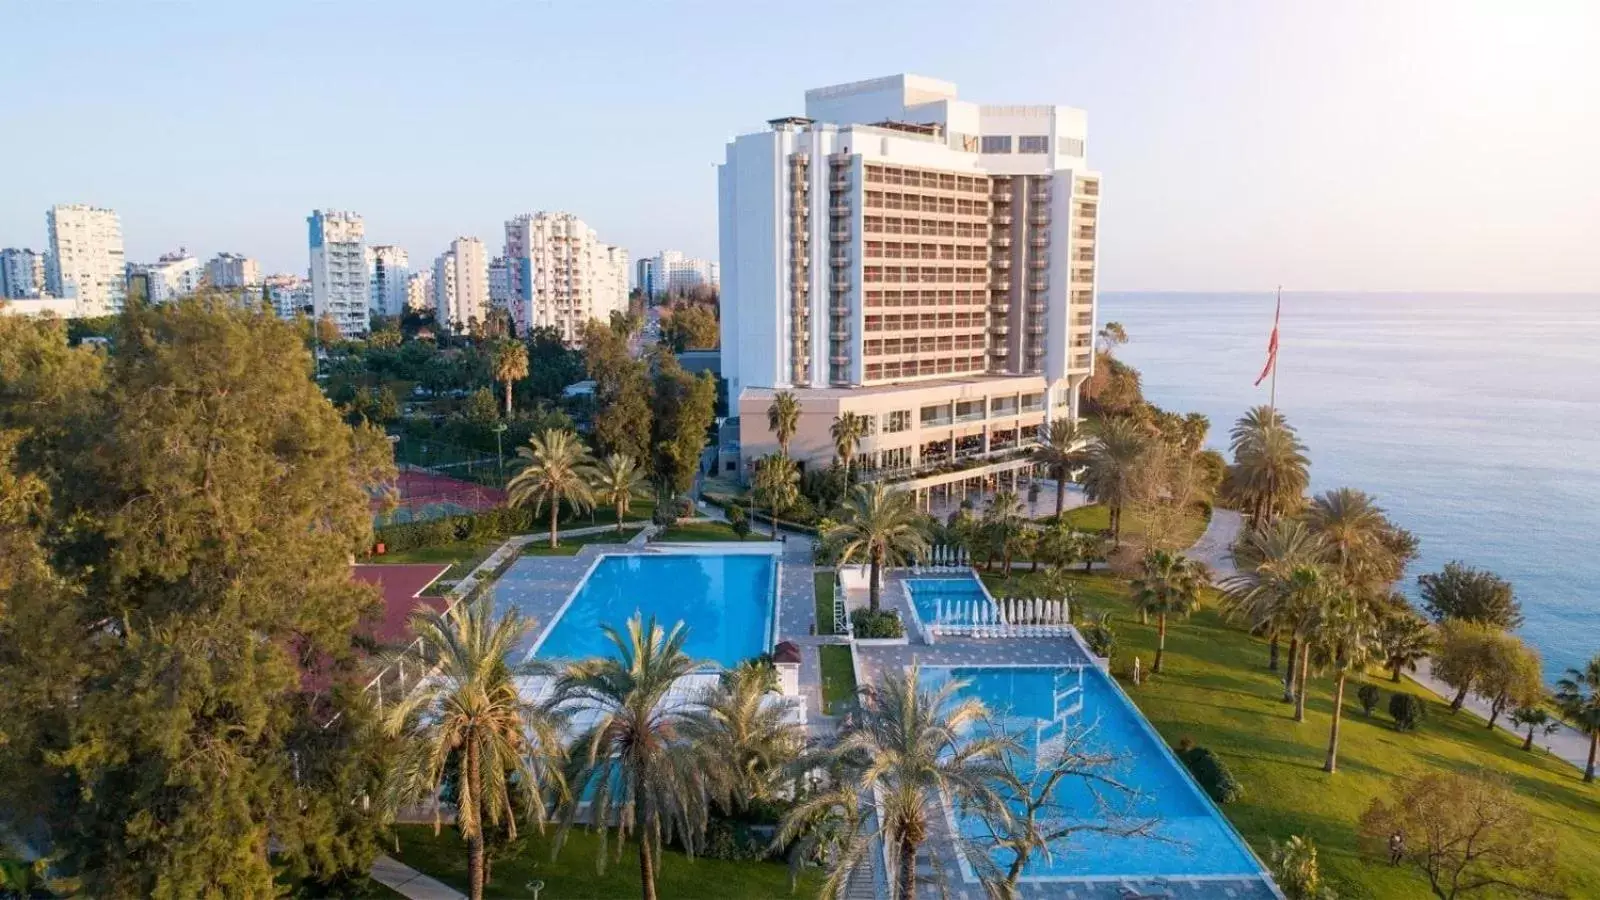 Property building, Pool View in Akra Hotel